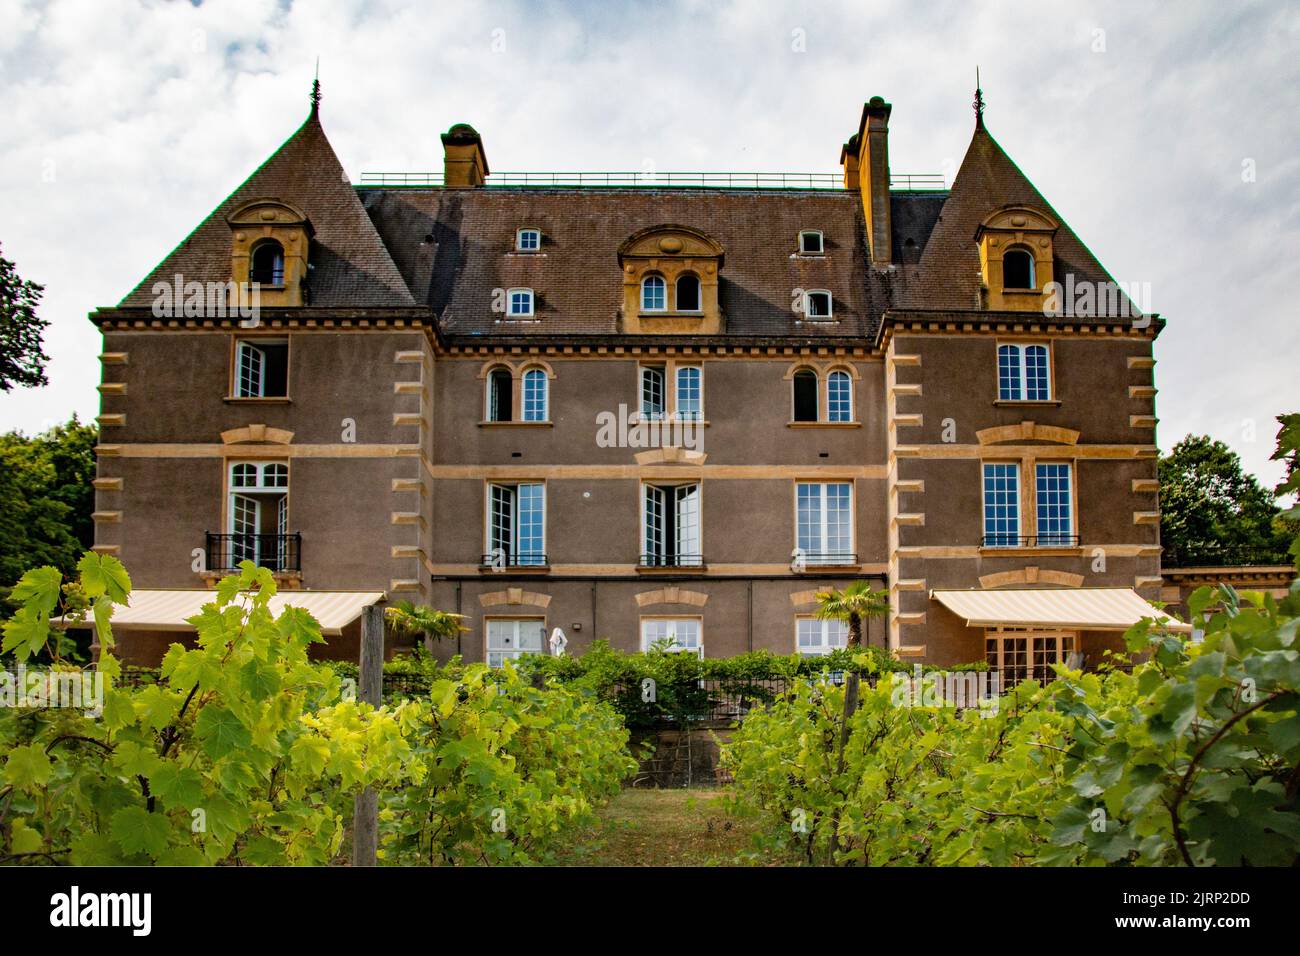 The beautiful and imposing Ö Chateau Hotel and Restaurant, Hayange, France Stock Photo